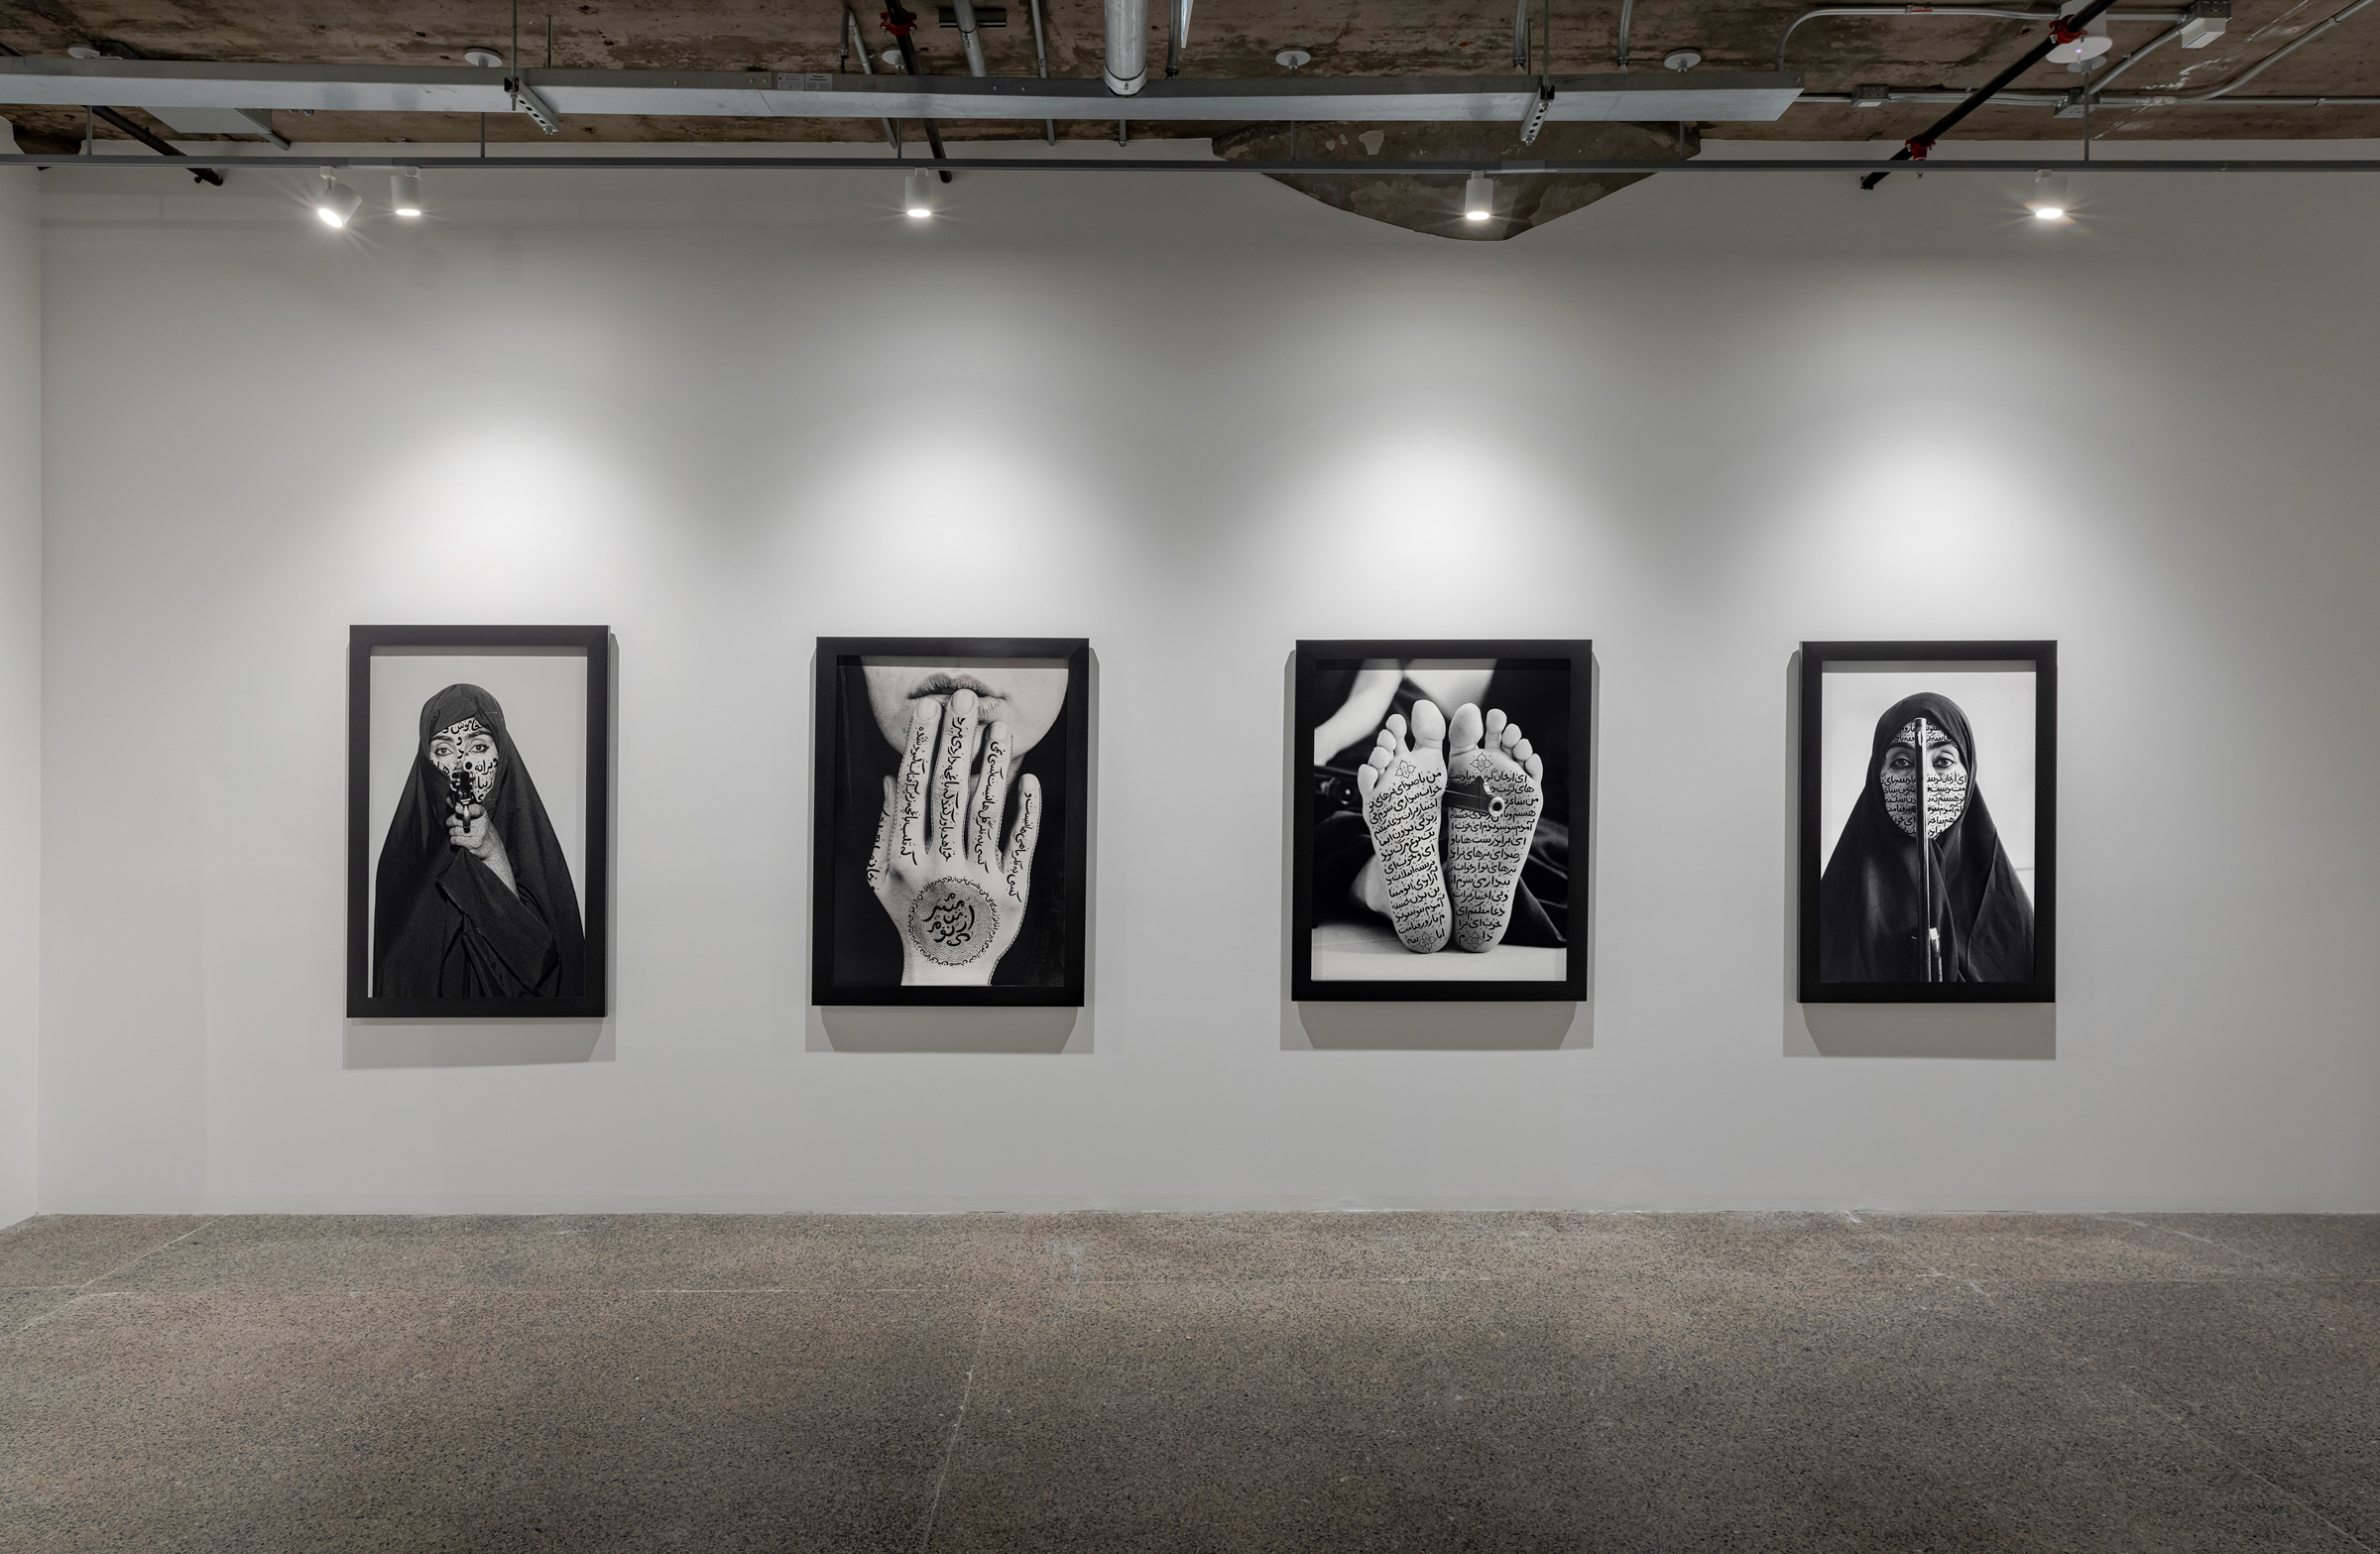     Shirin Neshat, Land of Dreams, installation view (Women of Allah), MOCA Toronto, 2022. © Shirin Neshat. Courtesy of the artist; Gladstone Gallery, New York and Brussels; and Goodman Gallery, Johannesburg, Cape Town, and London. Photo: Toni Hafkenscheid

